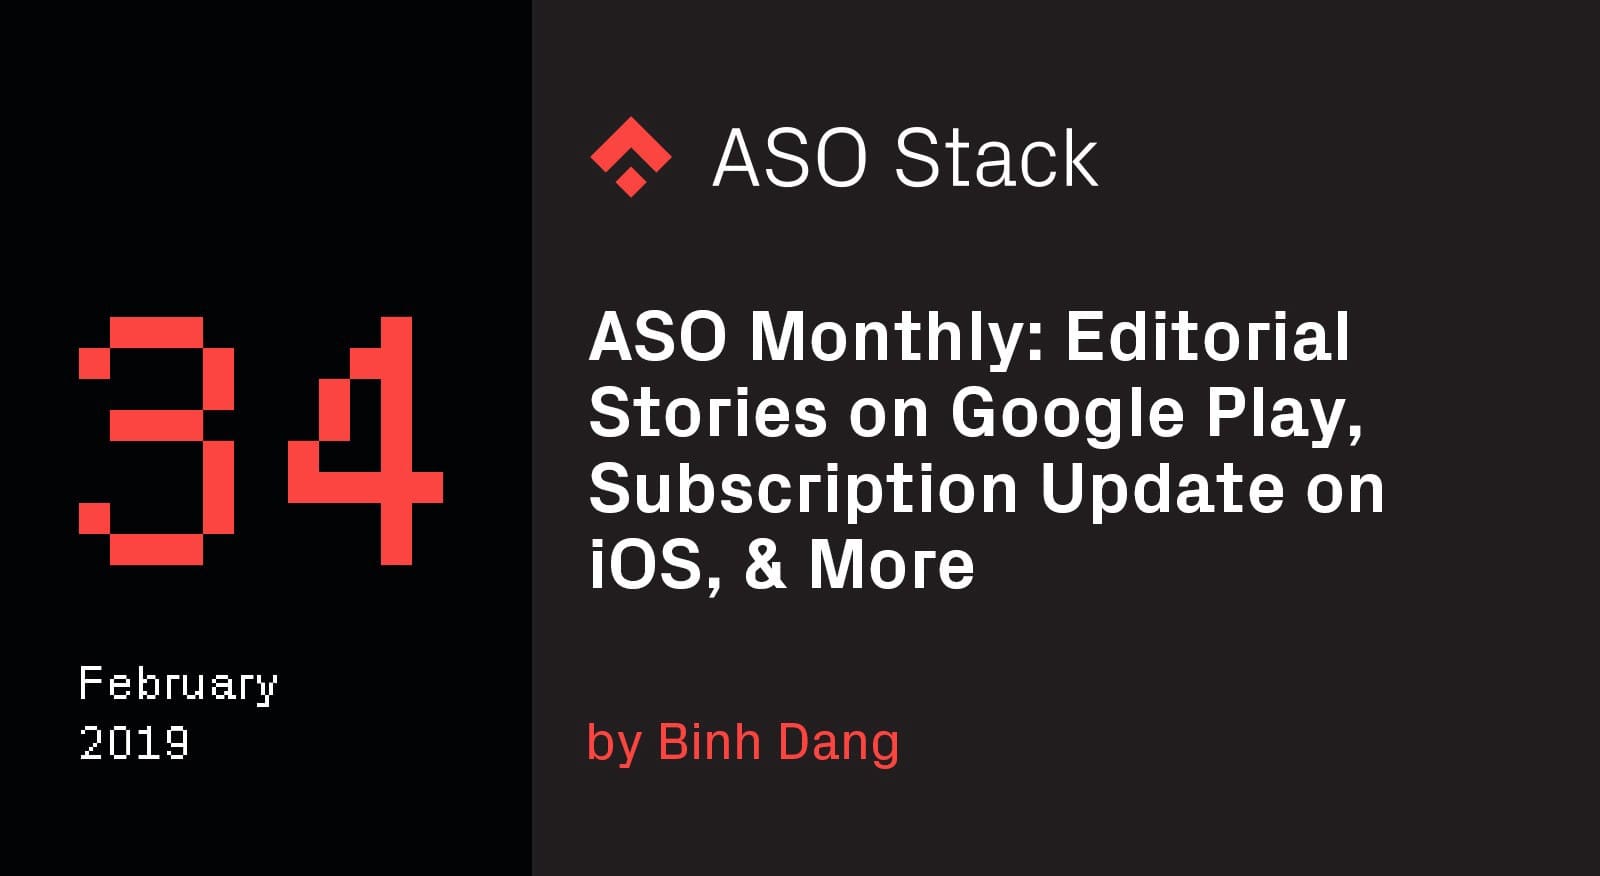 ASO Monthly #34 February 2019- Editorial Stories on Google Play, Subscription Update on iOS, & More